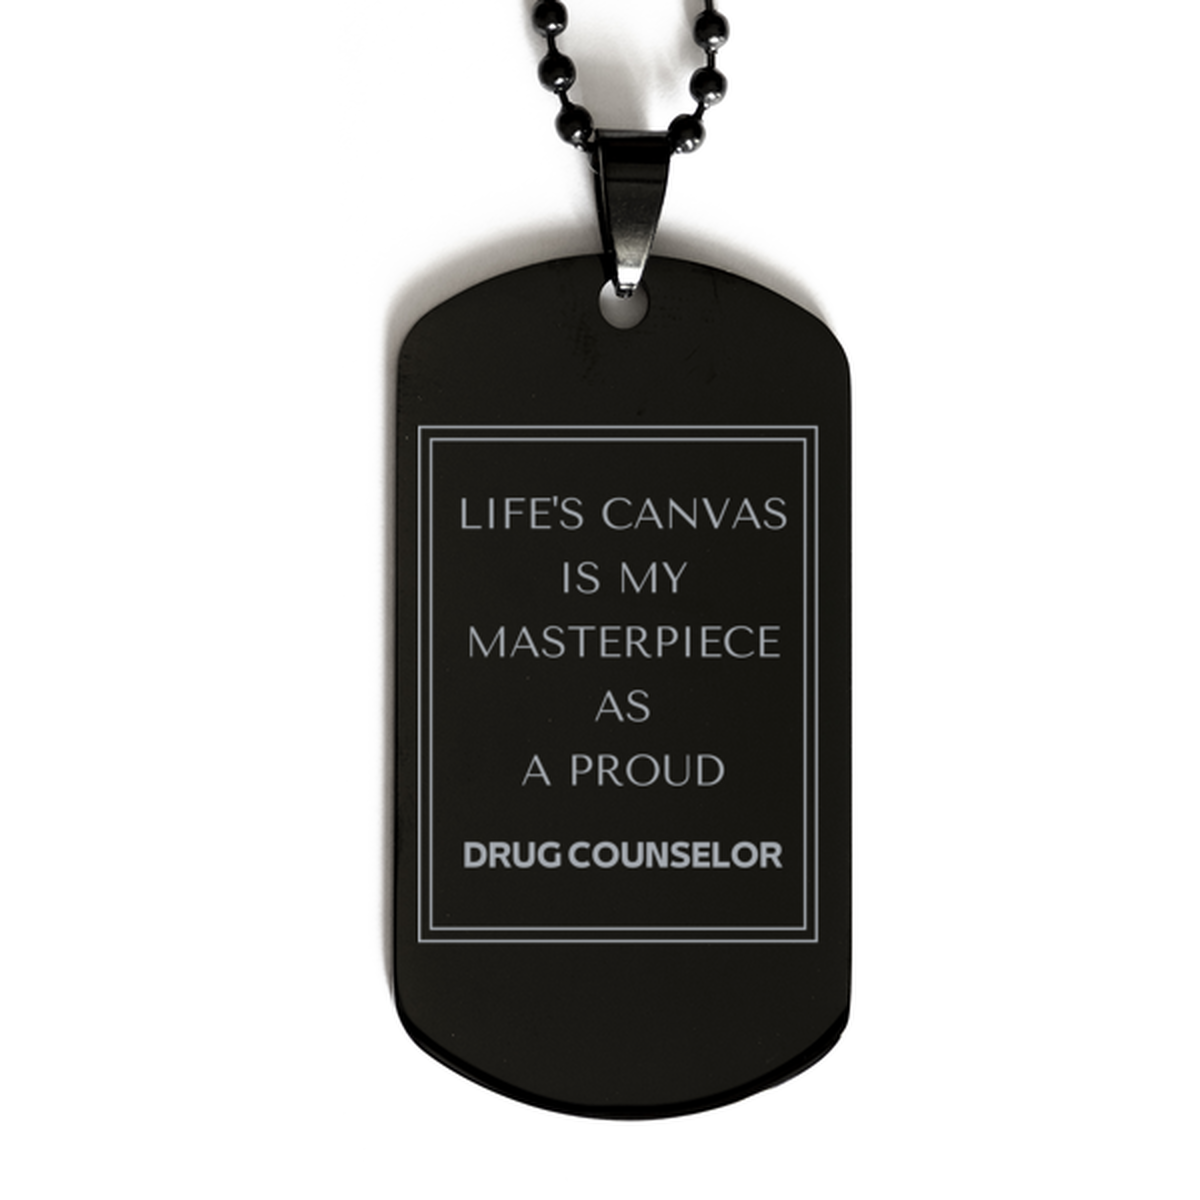 Proud Drug Counselor Gifts, Life's canvas is my masterpiece, Epic Birthday Christmas Unique Black Dog Tag For Drug Counselor, Coworkers, Men, Women, Friends